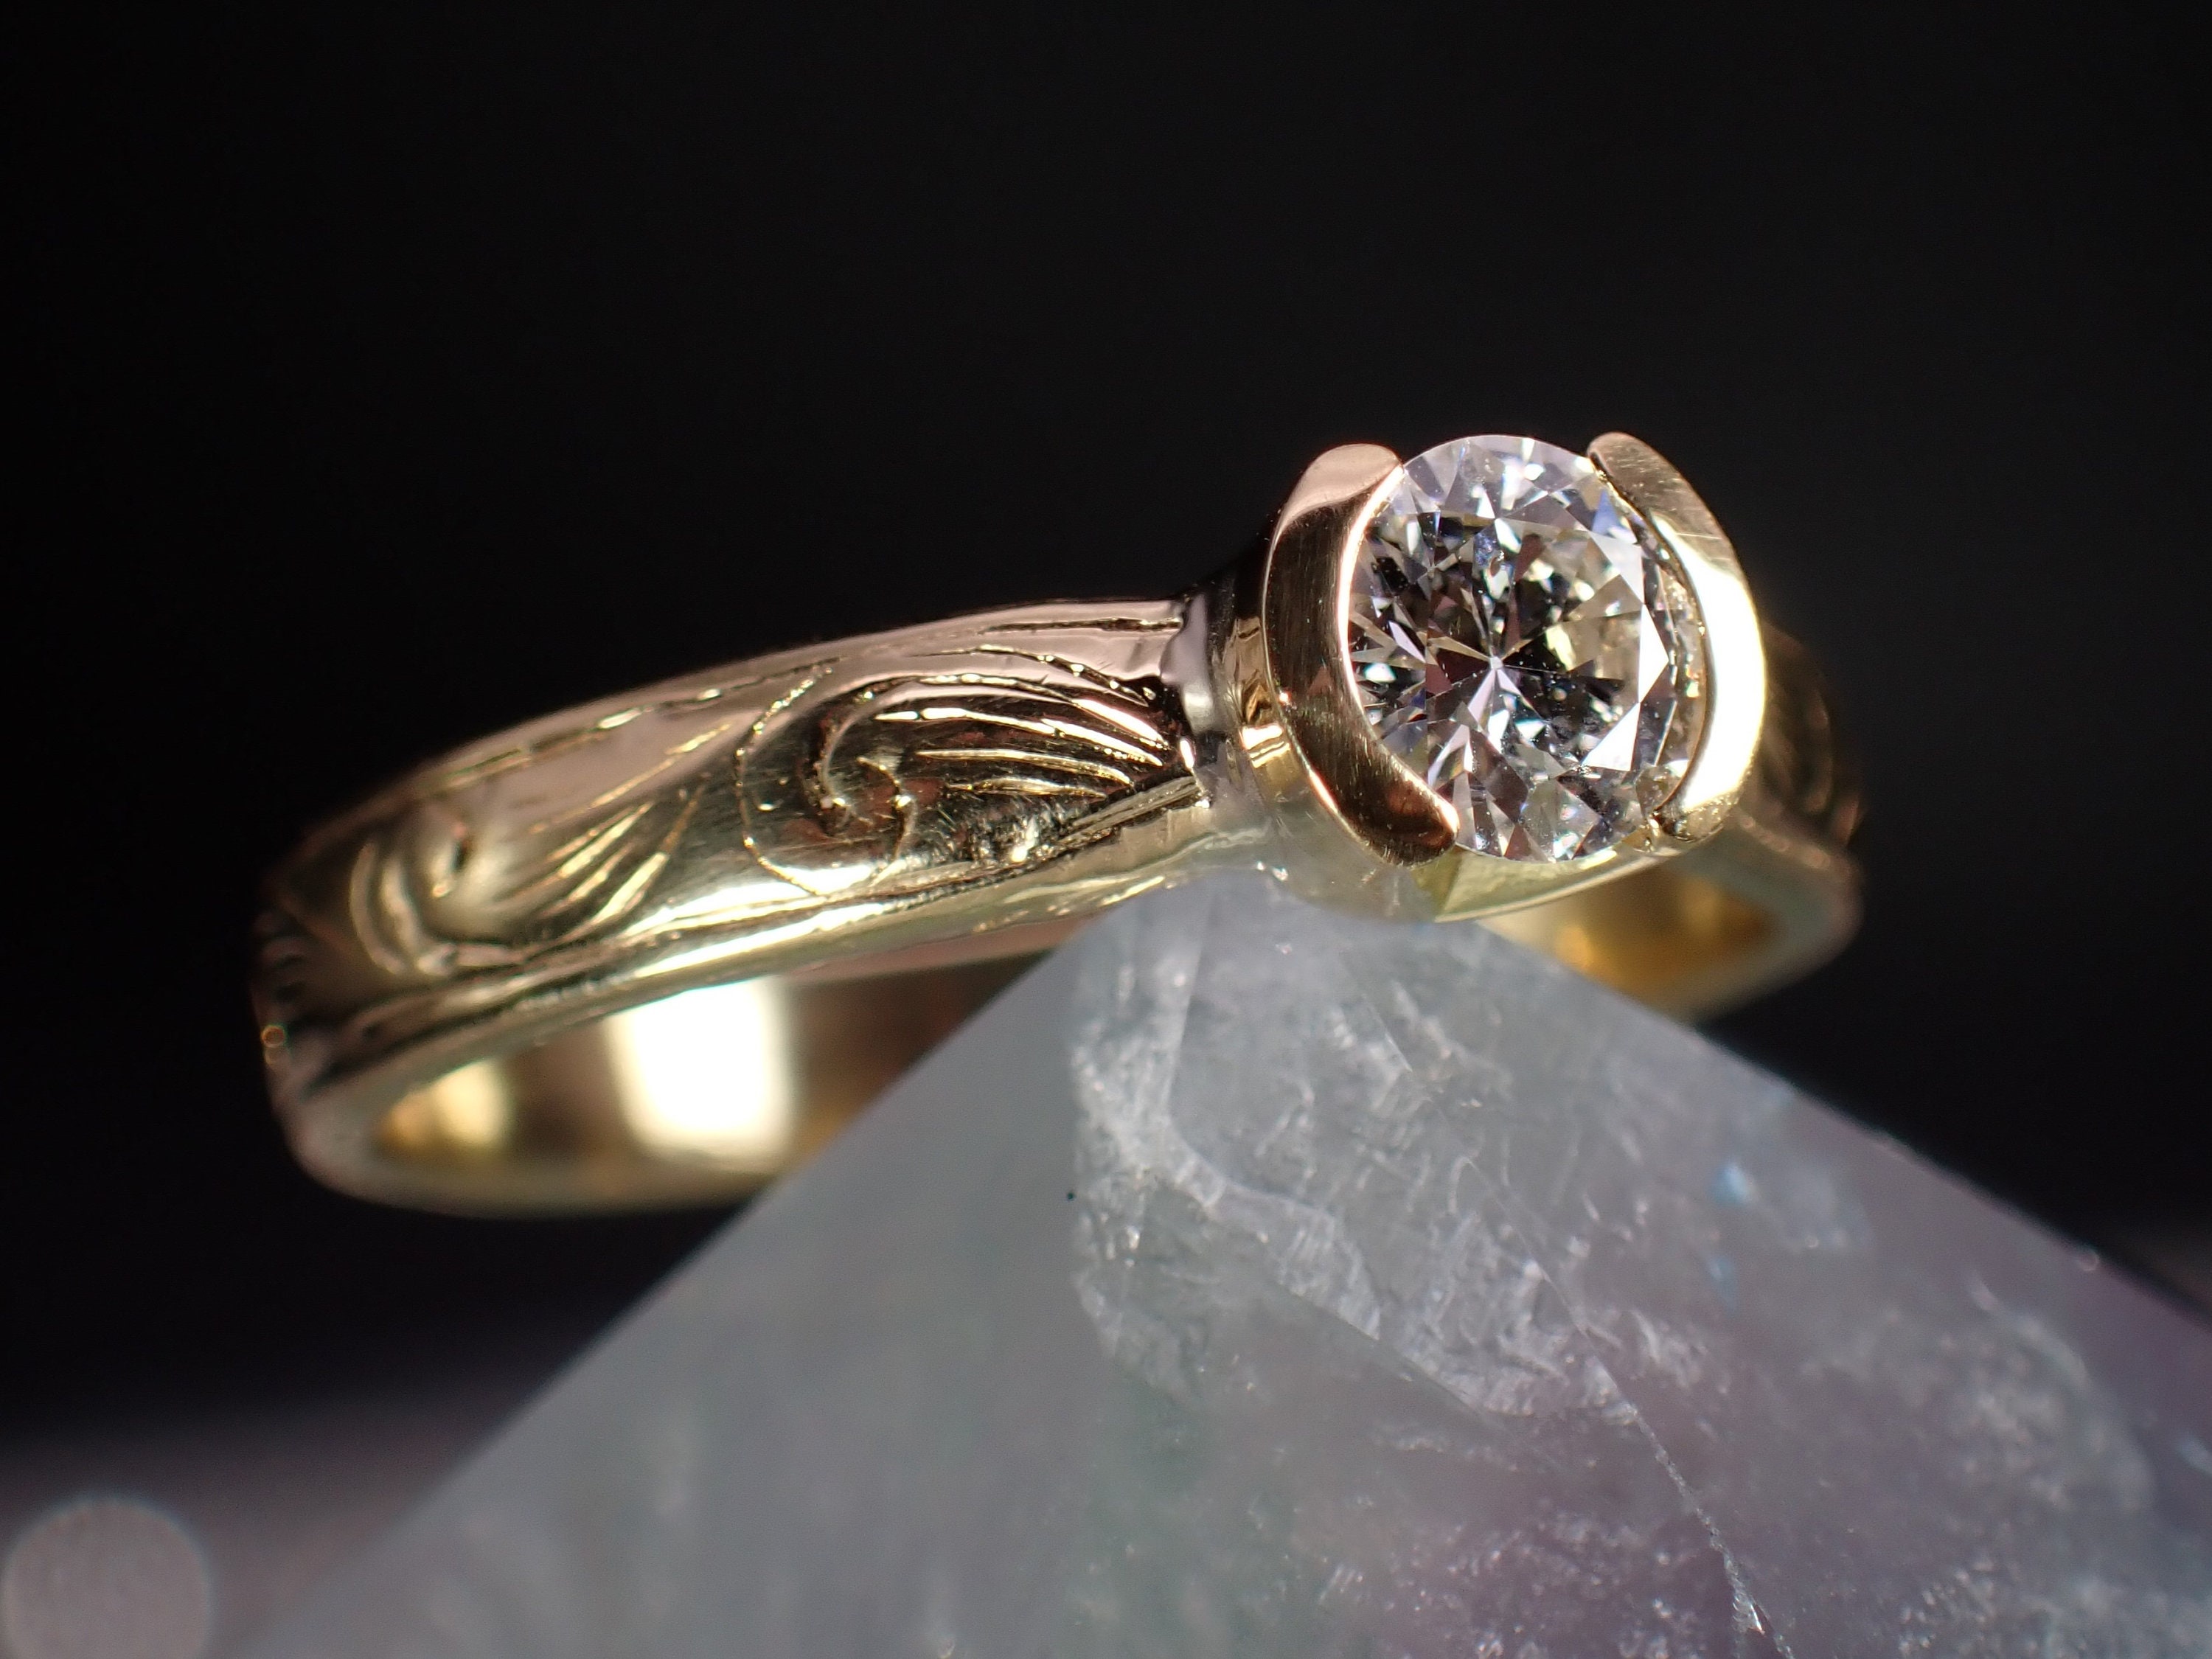 Buy Unusual Antique Diamond Chased Gold Mens Ring Online in India - Etsy